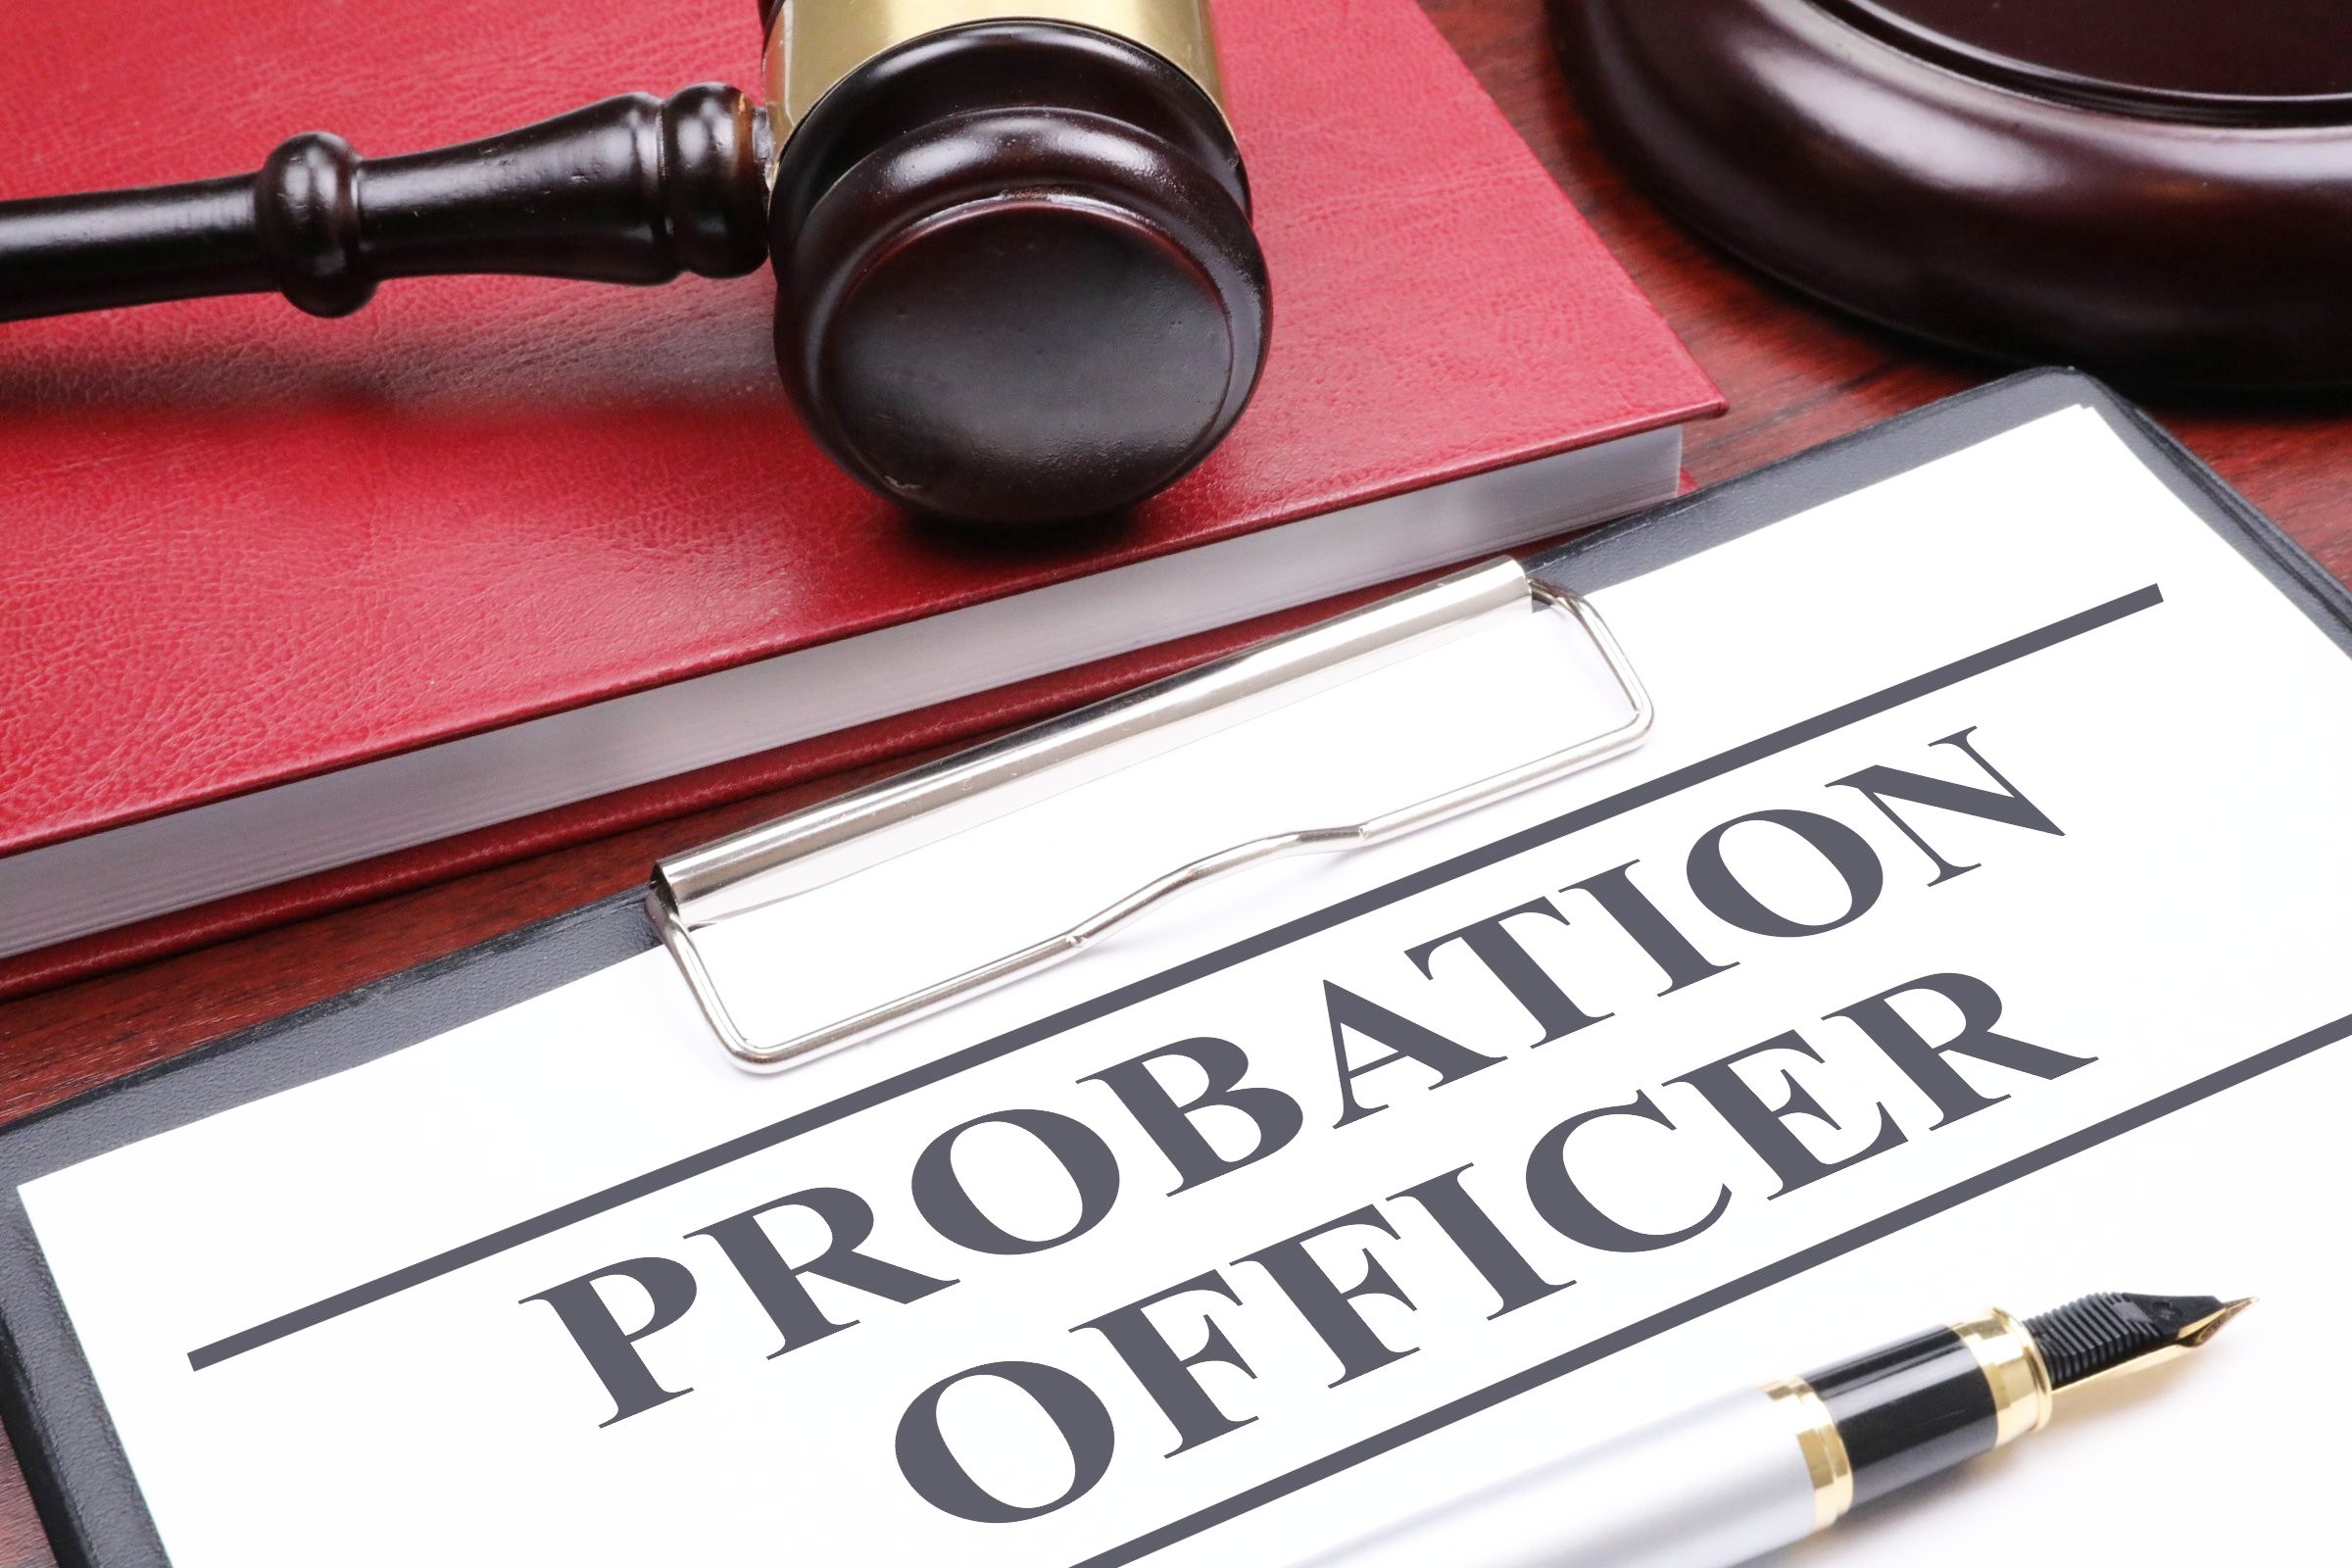 Probation Officer Free of Charge Creative Commons Legal 6 image